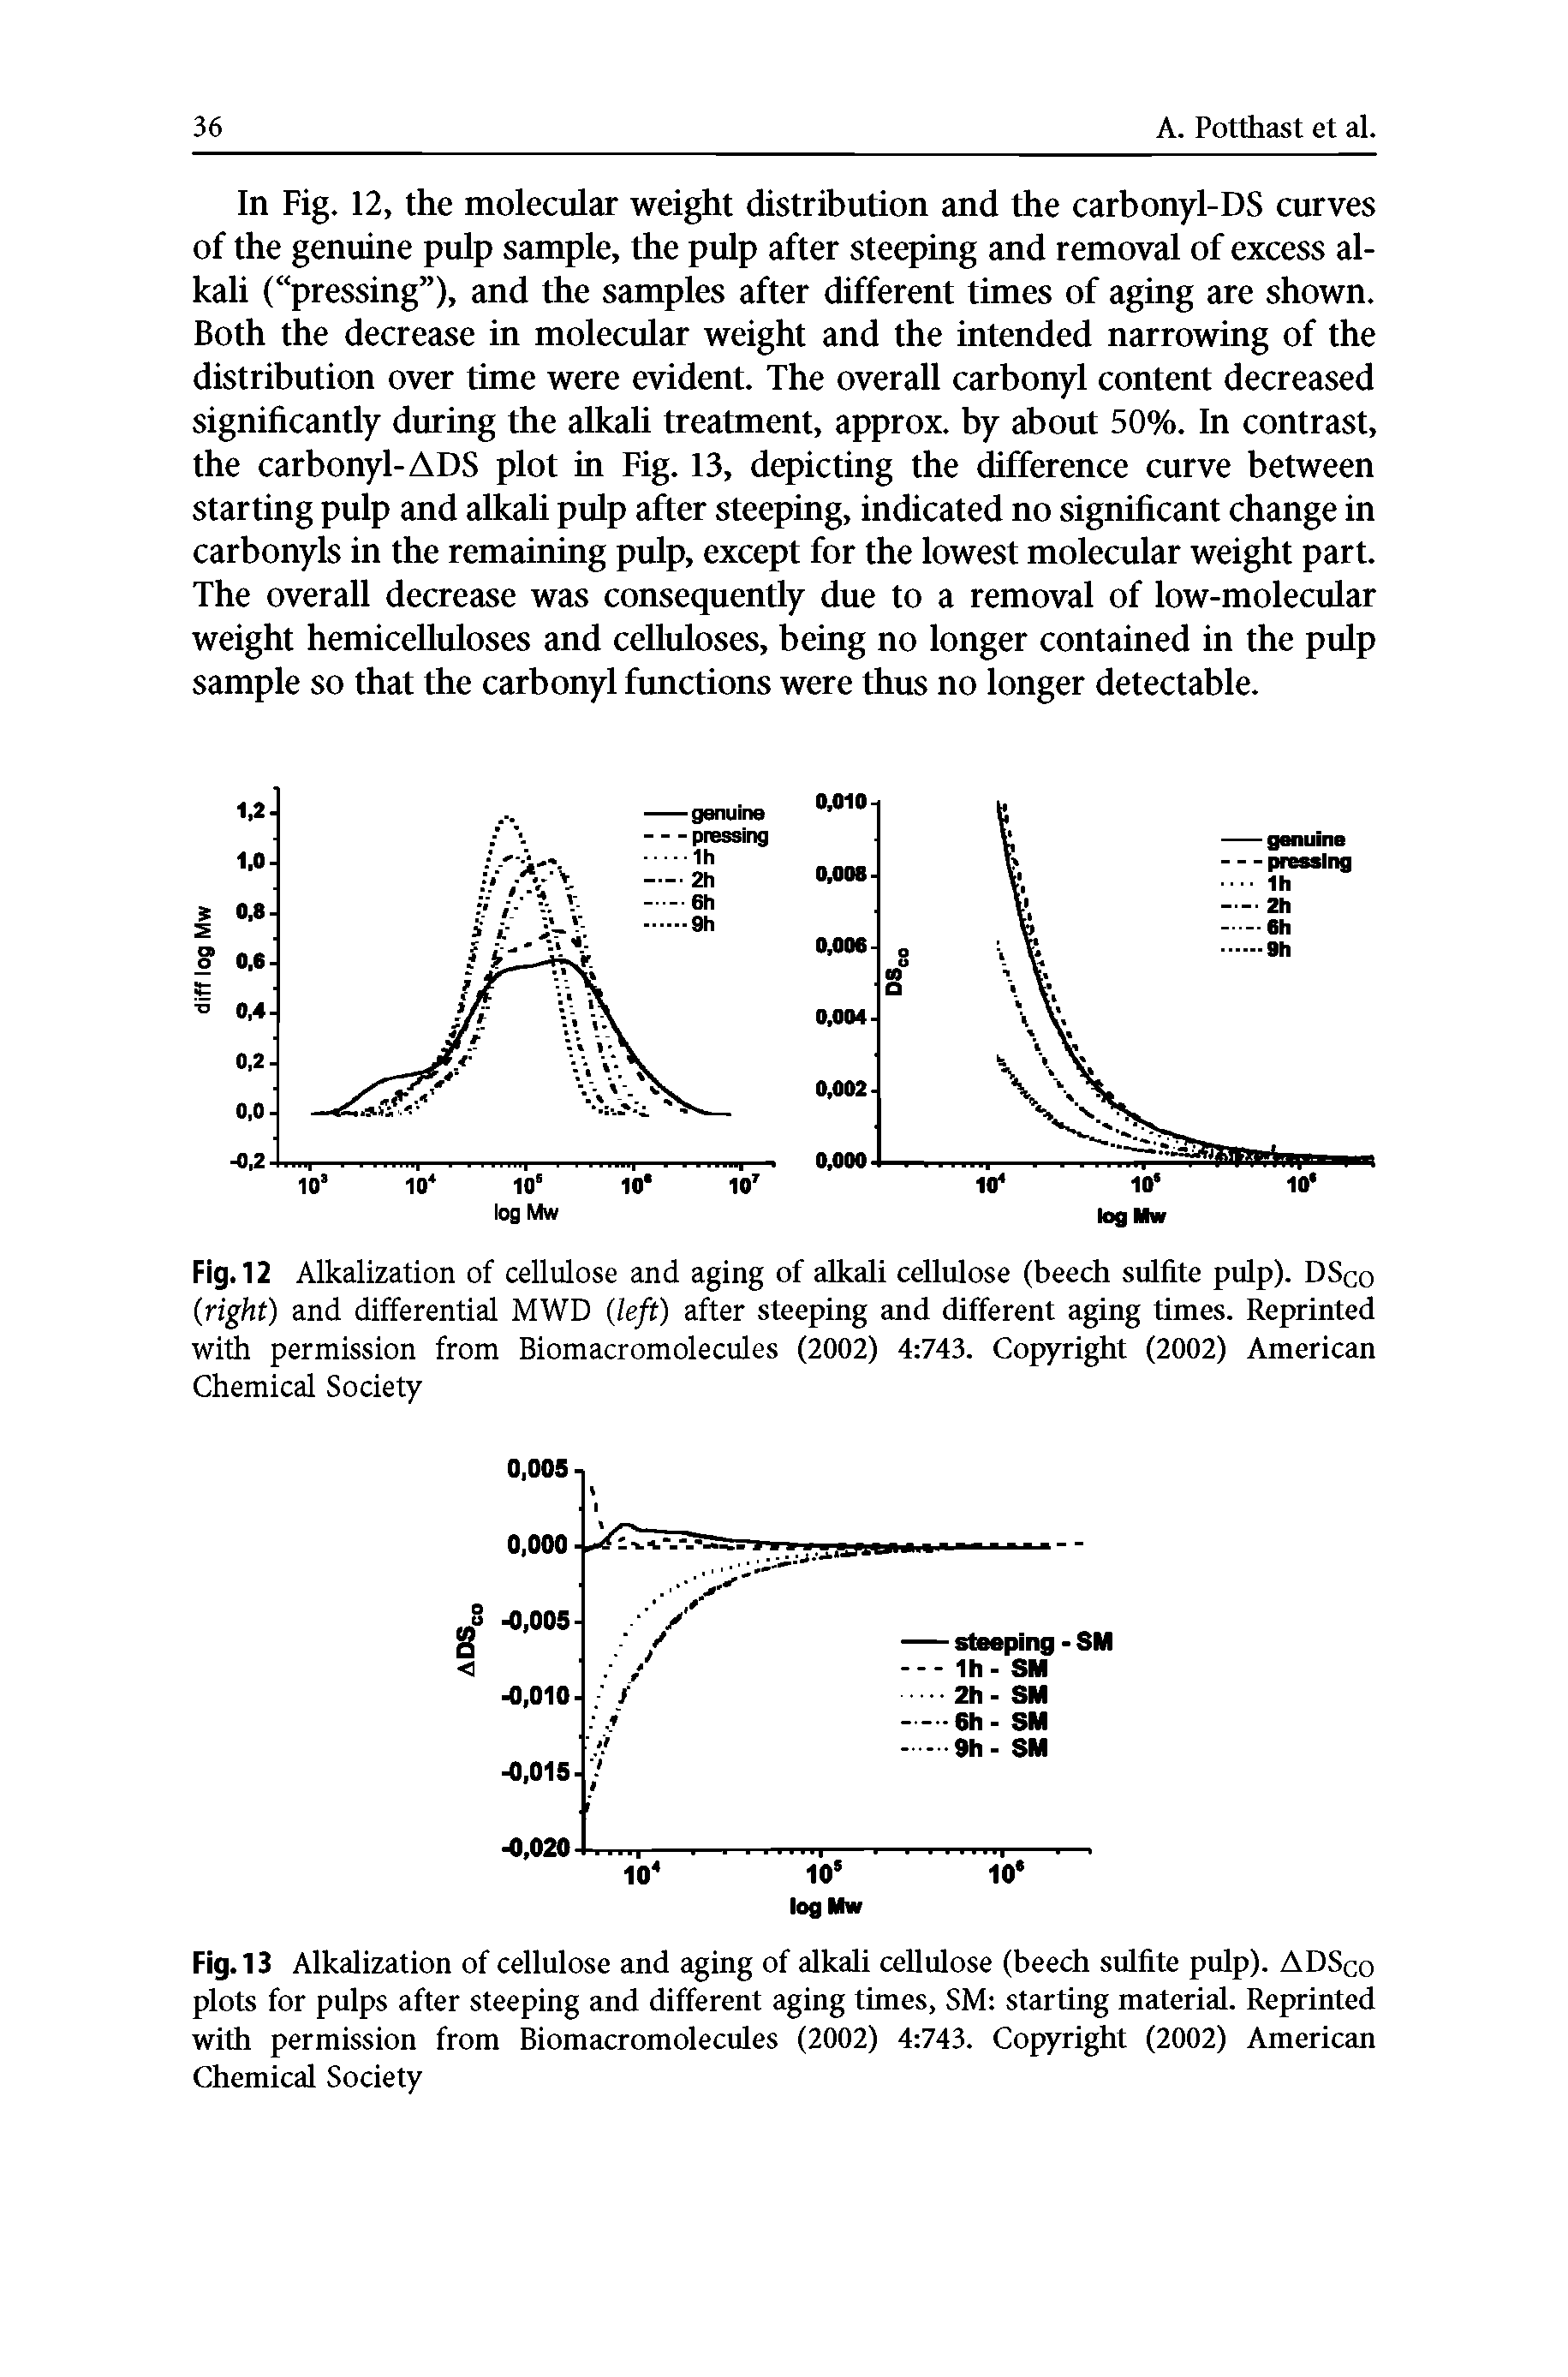 Fig. 12 Alkalization of cellulose and aging of alkali cellulose (beech sulfite pulp). DSco (right) and differential MWD (left) after steeping and different aging times. Reprinted with permission from Biomacromolecules (2002) 4 743. Copyright (2002) American Chemical Society...